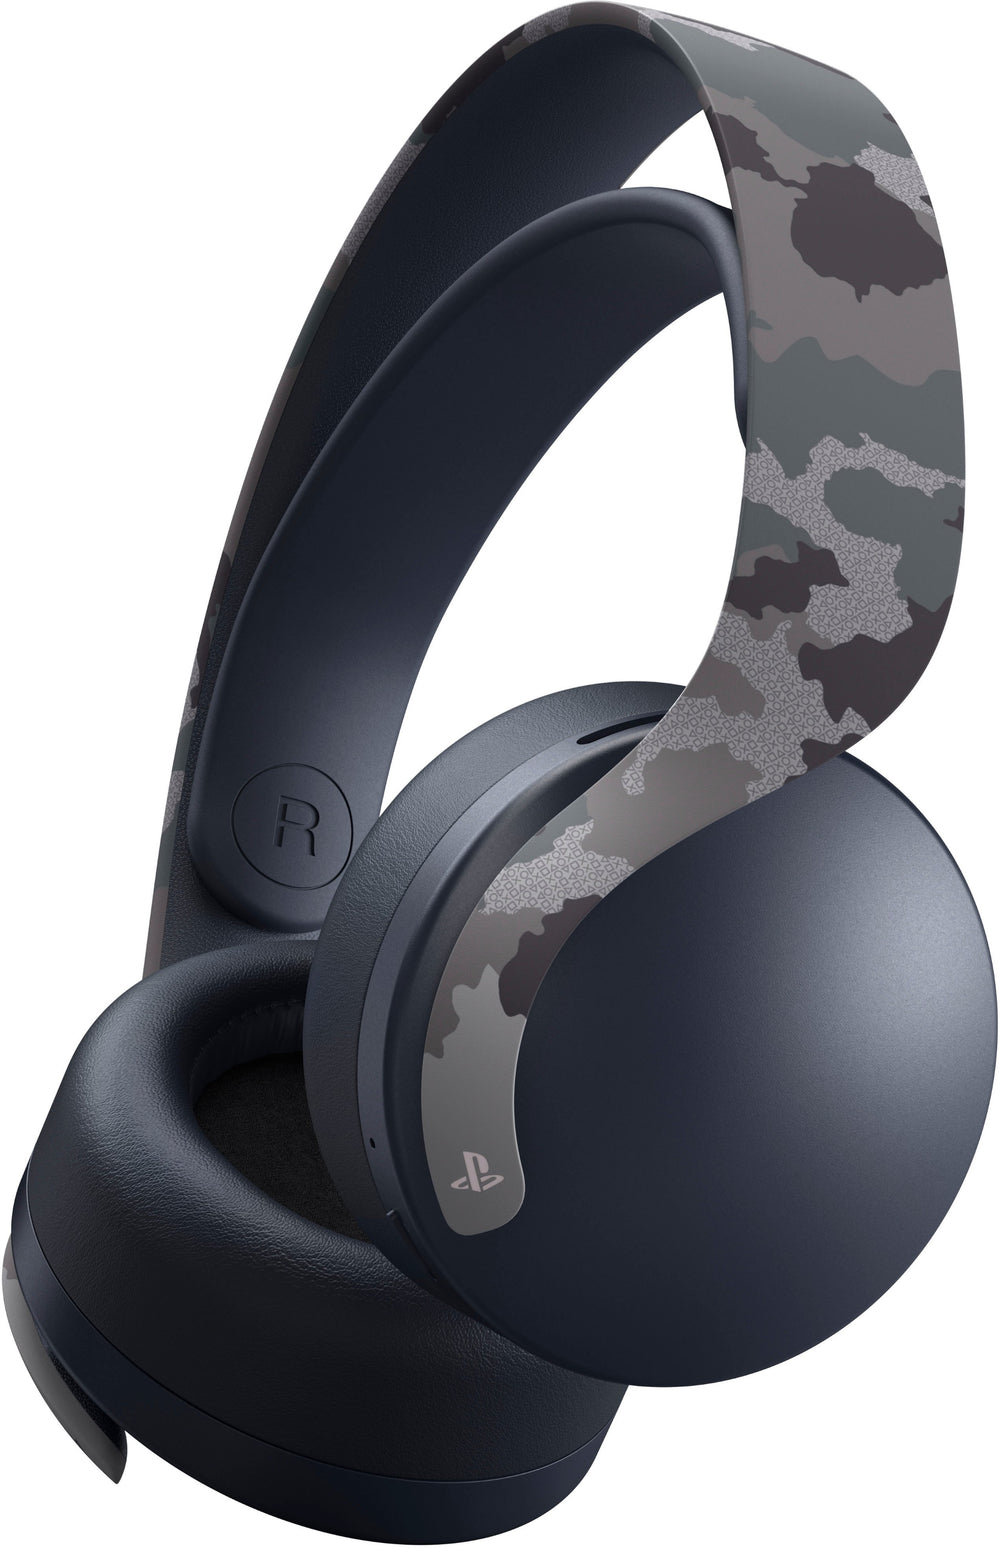 Sony - PULSE 3D Wireless Headset for PS5, PS4, and PC - Gray Camouflage_1